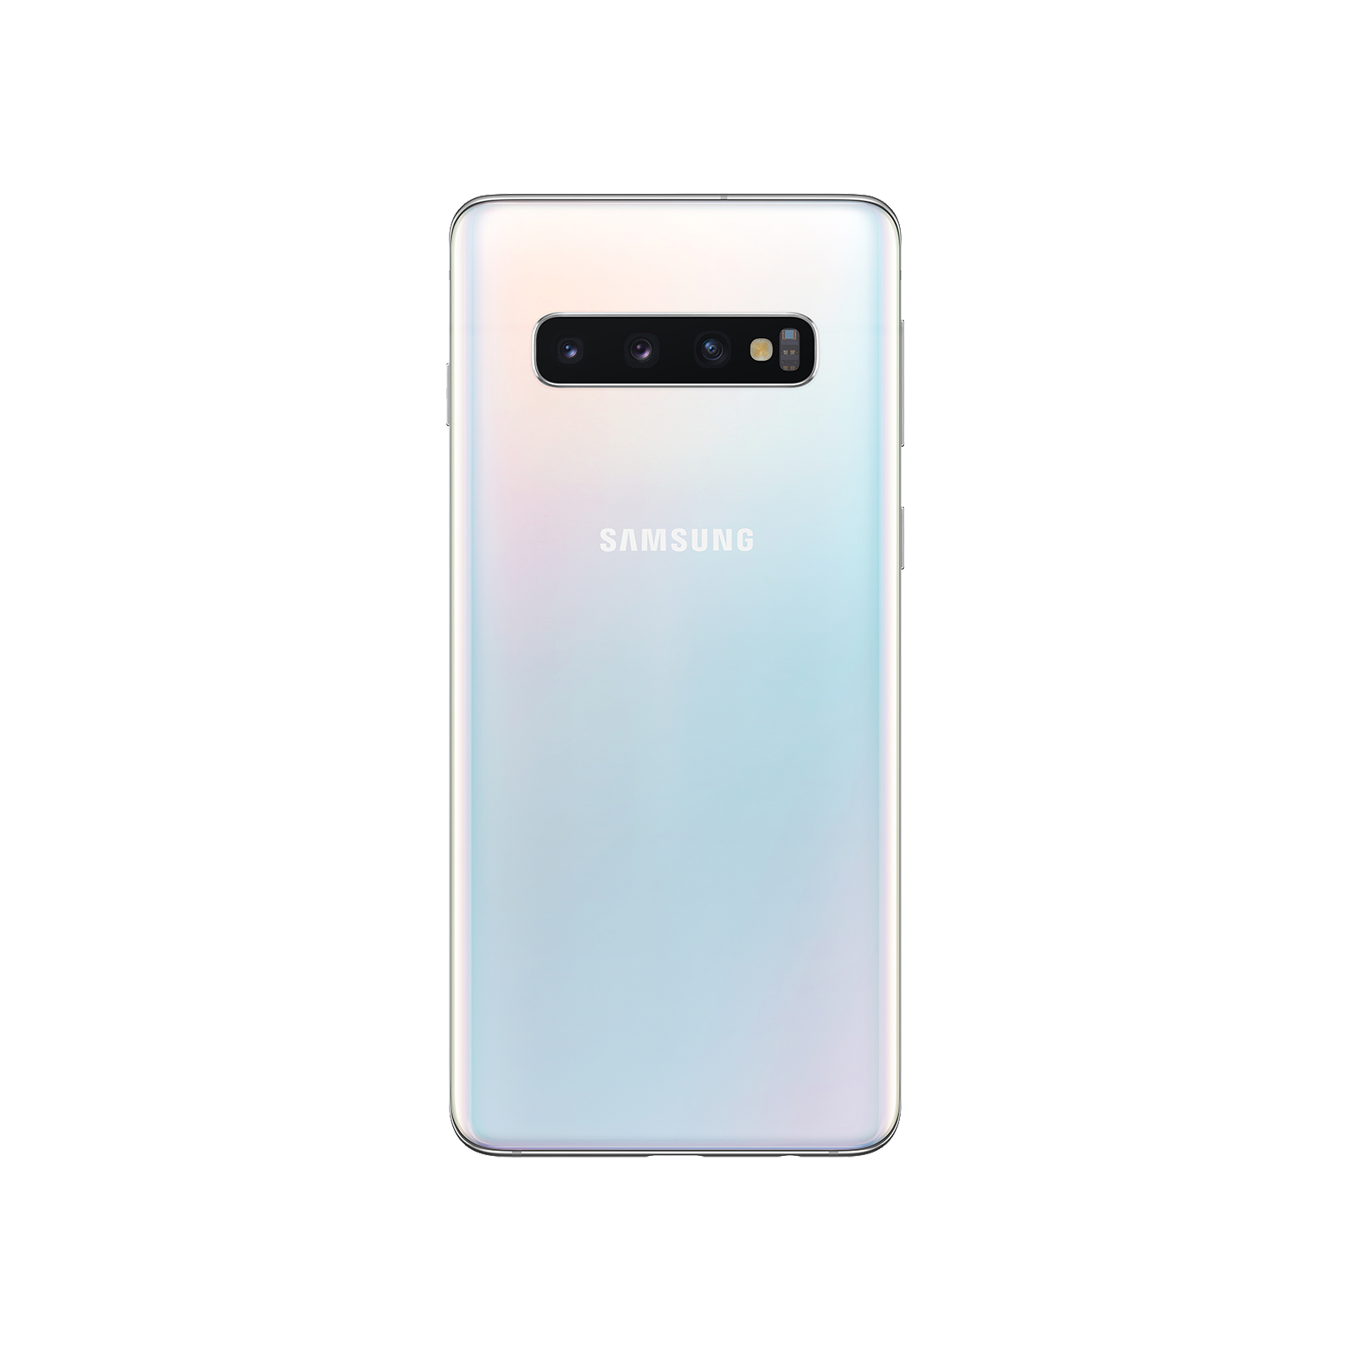 Samsung Galaxy S10 IMEI repair service to fix bad or blacklisted IMEI, ensuring full functionality and connectivity, available at cleanimei.com